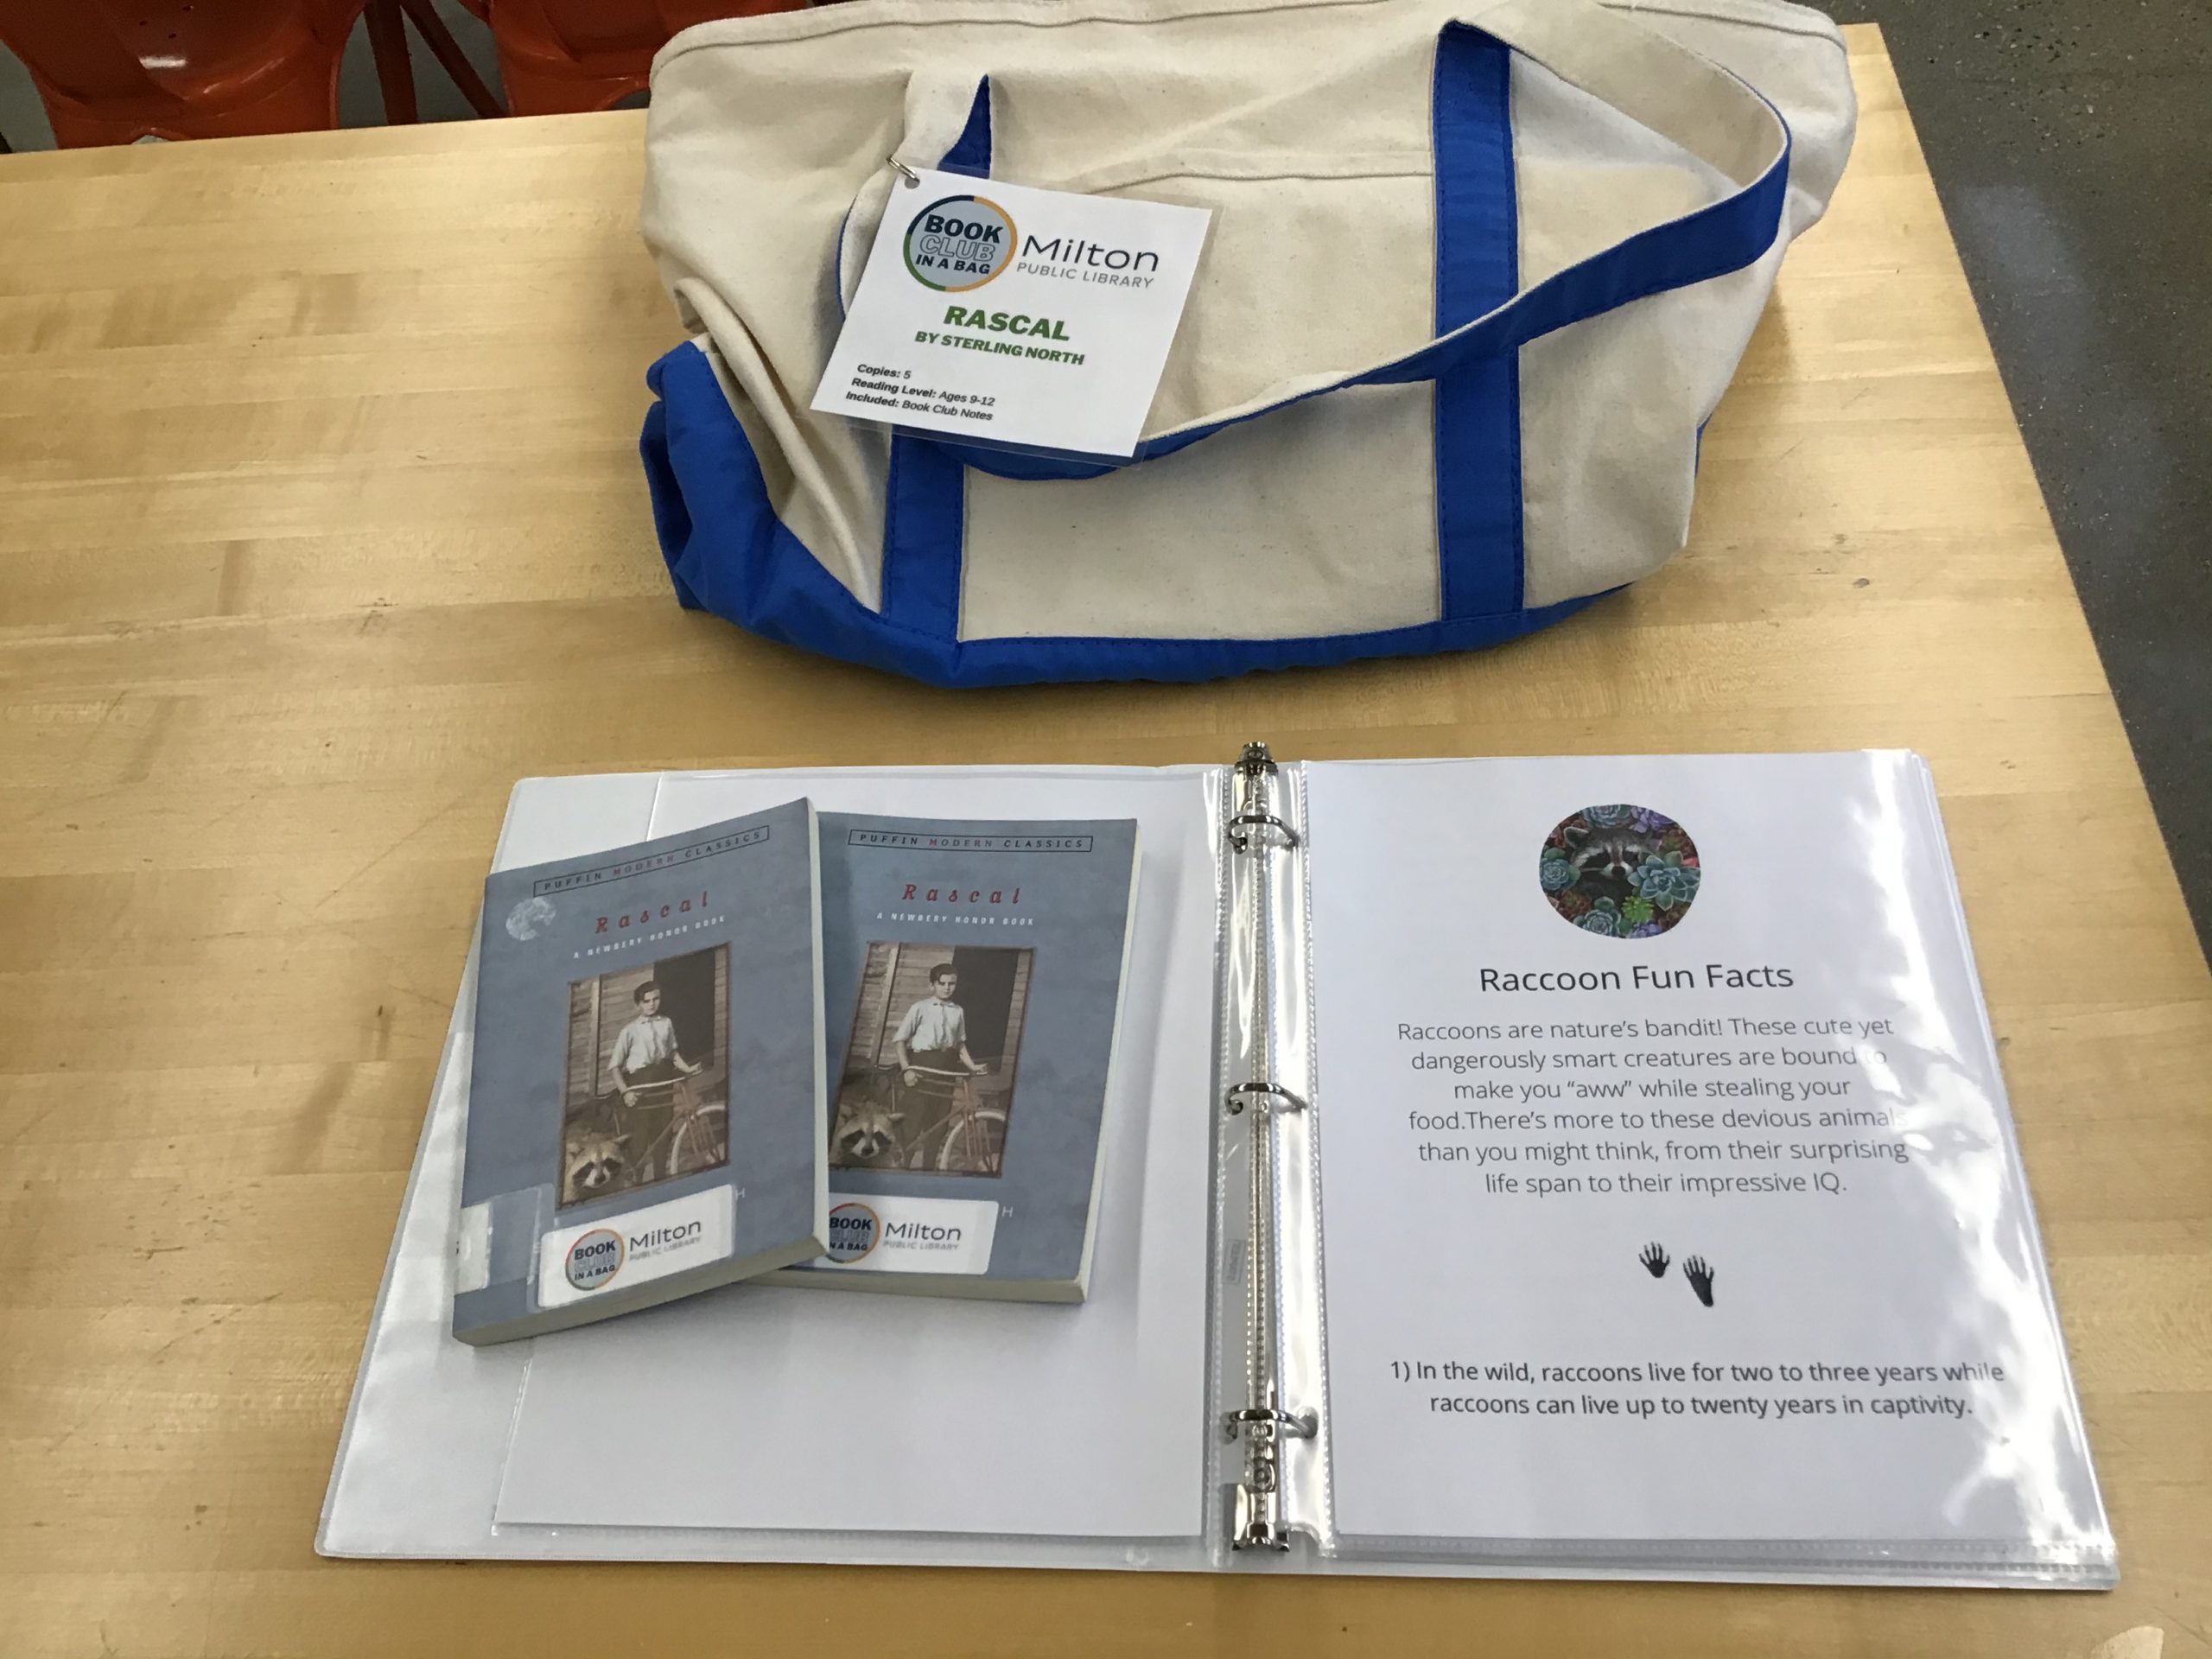 Canvas bag with two copies of the book displayed on the book club guide.